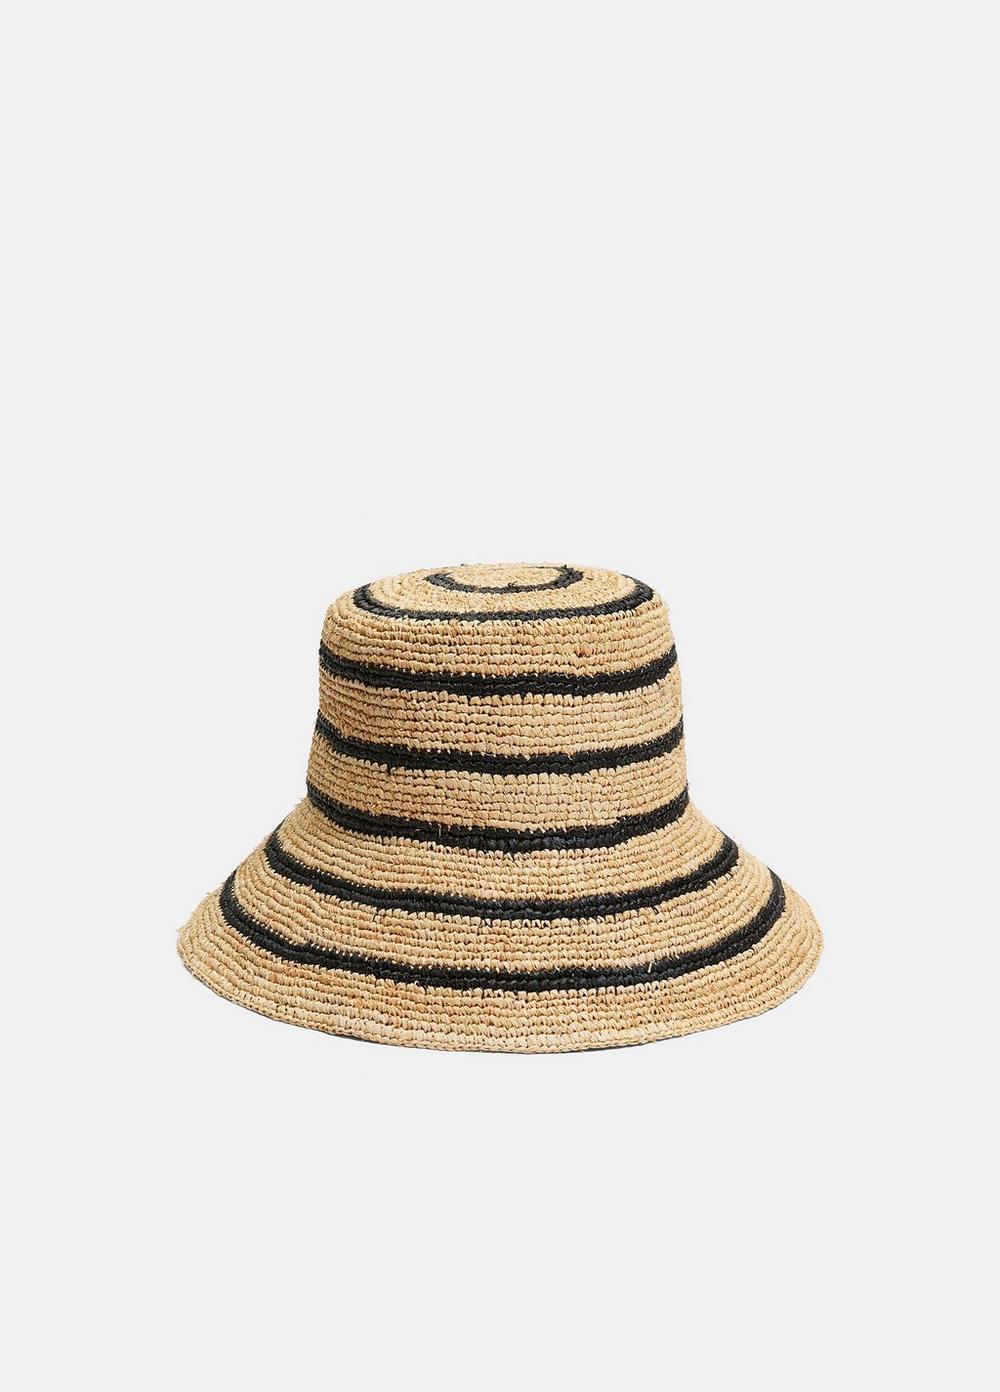 Striped Straw Hat, Natural/black, Size S/M Vince